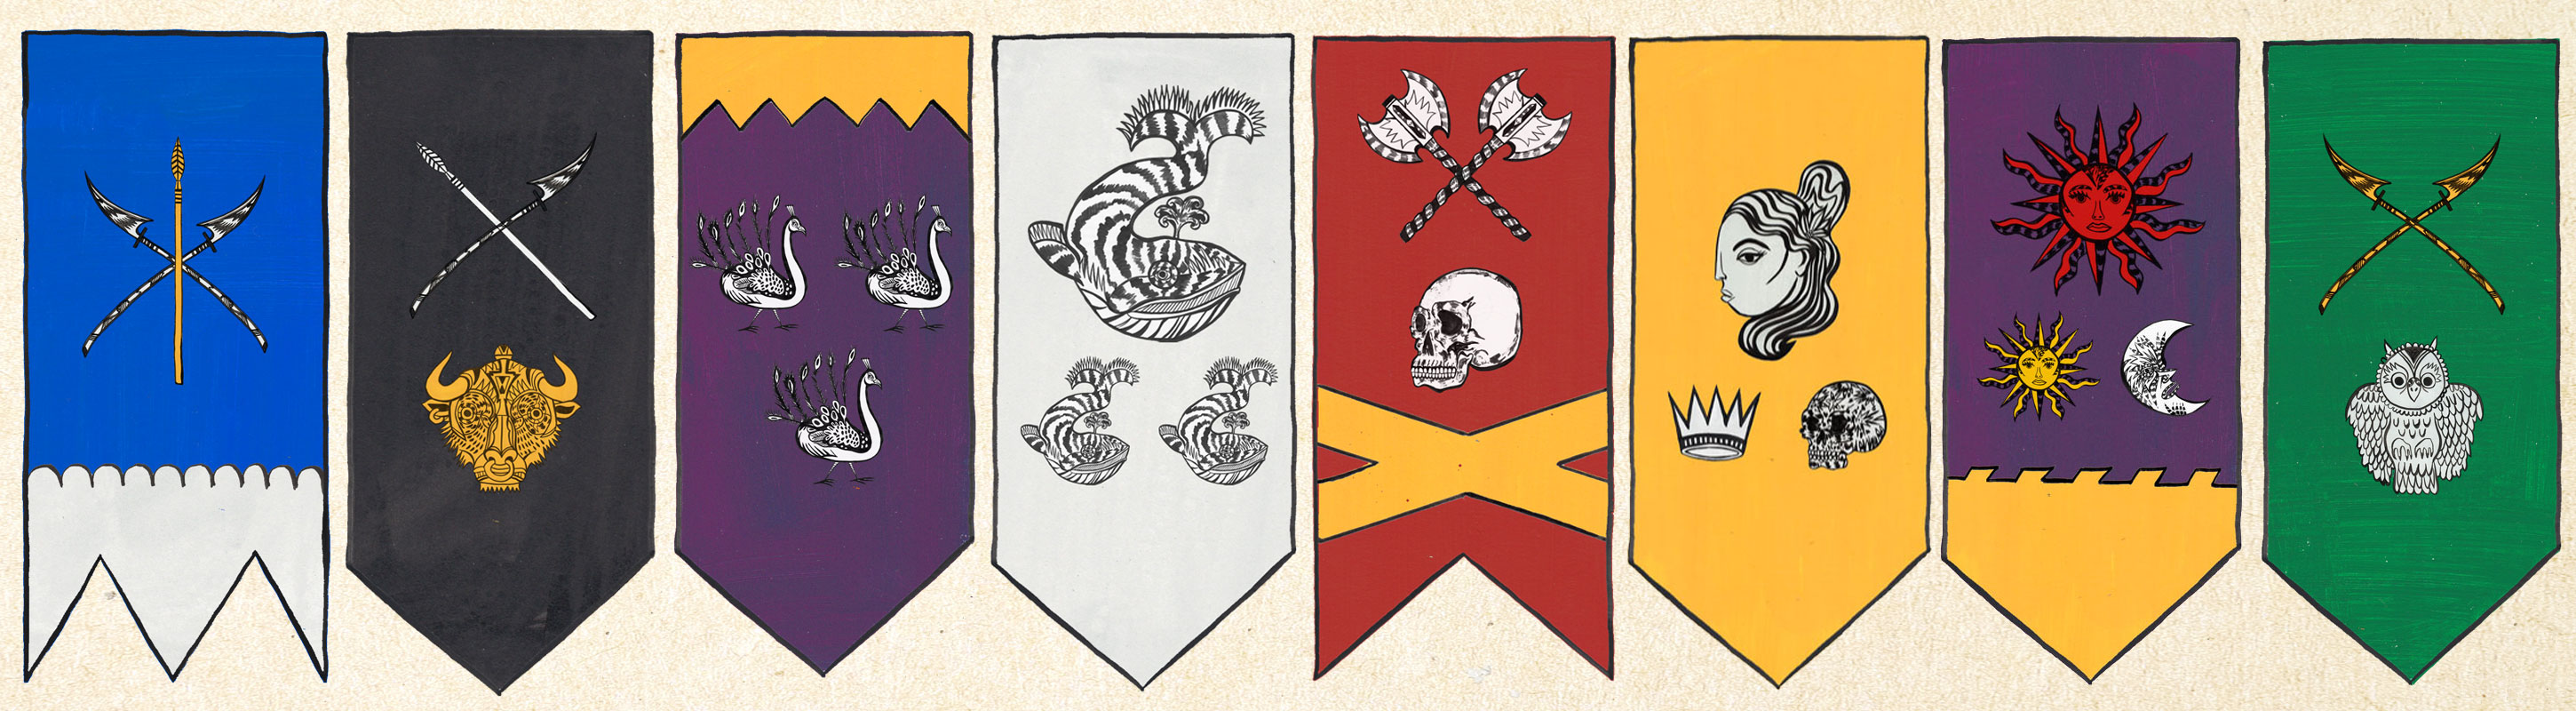 Banners (for Adventurers)